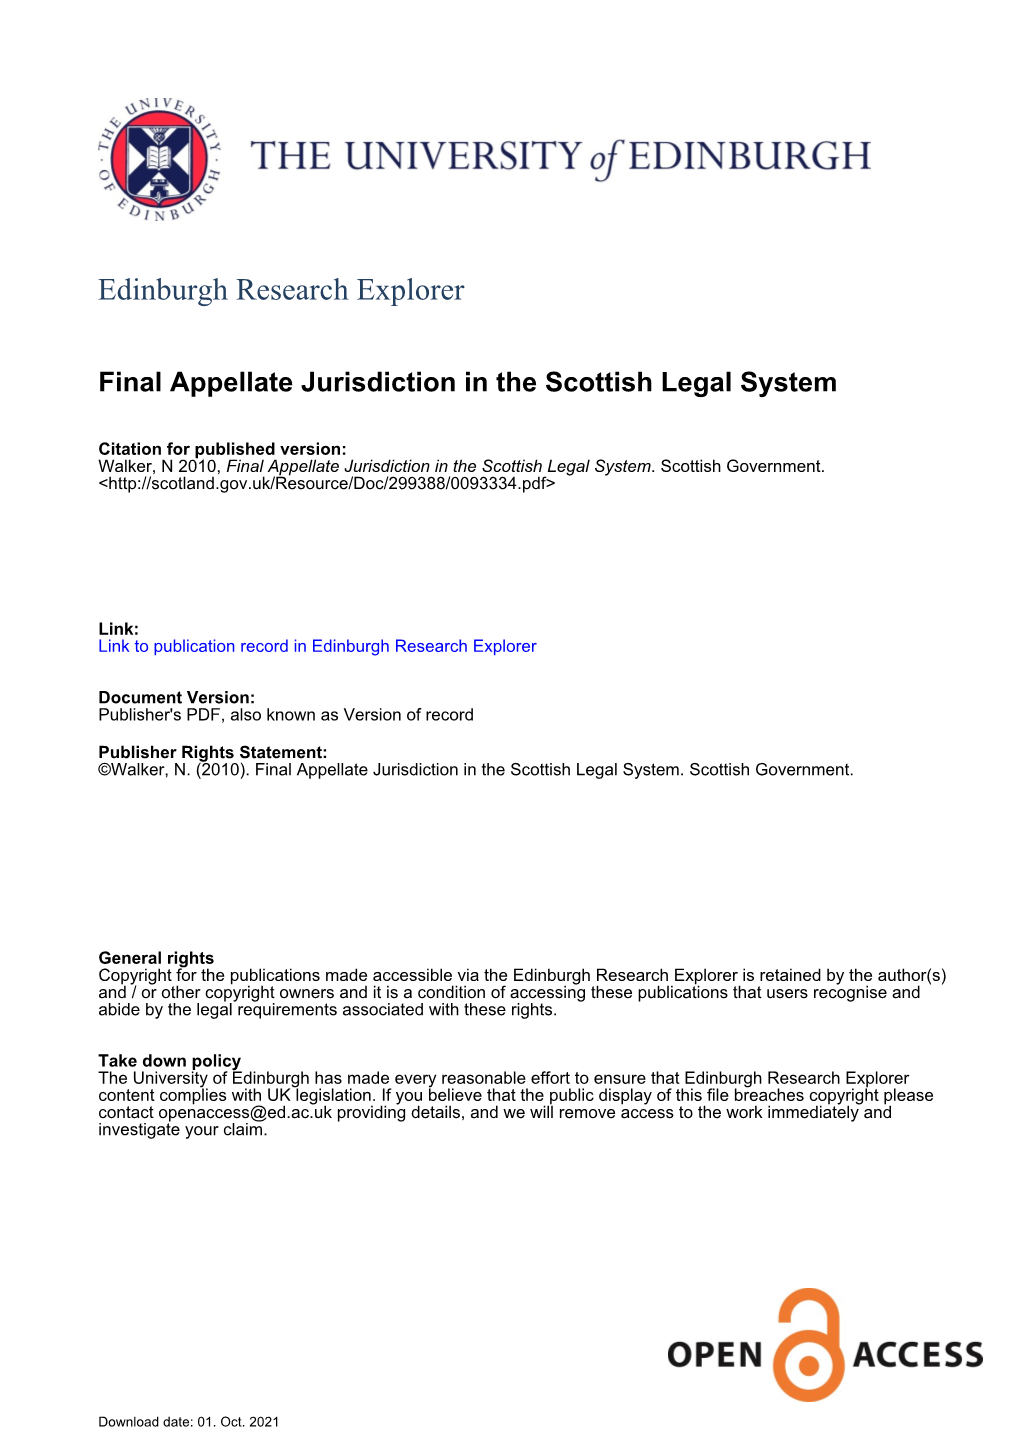 Final Appellate Jurisdiction in the Scottish Legal System